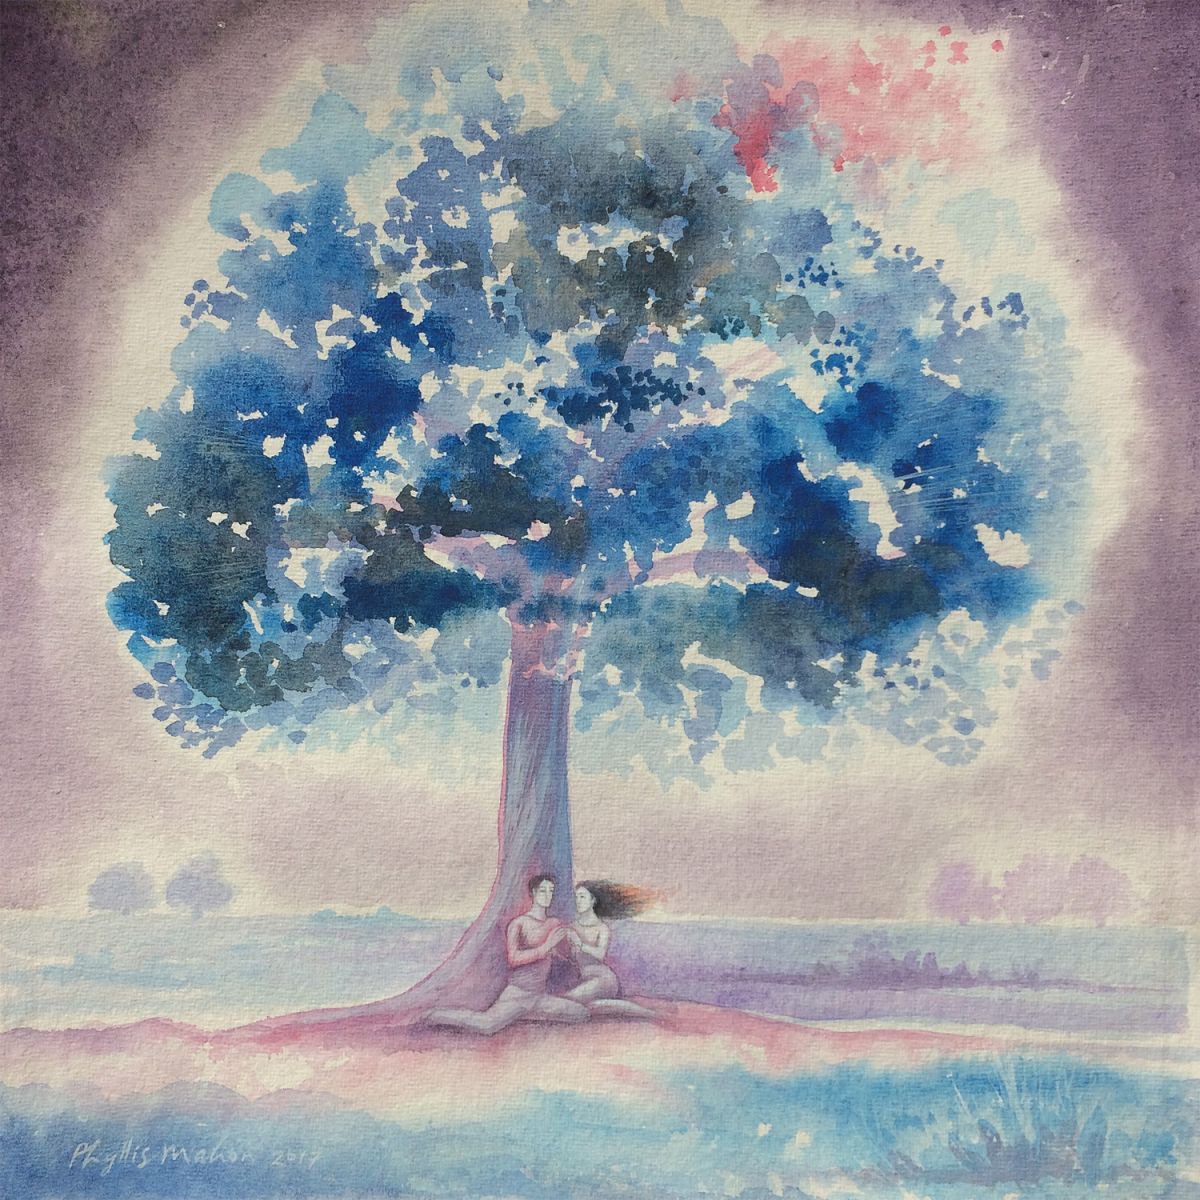 Lovers and tree on a summer evening by Phyllis Mahon